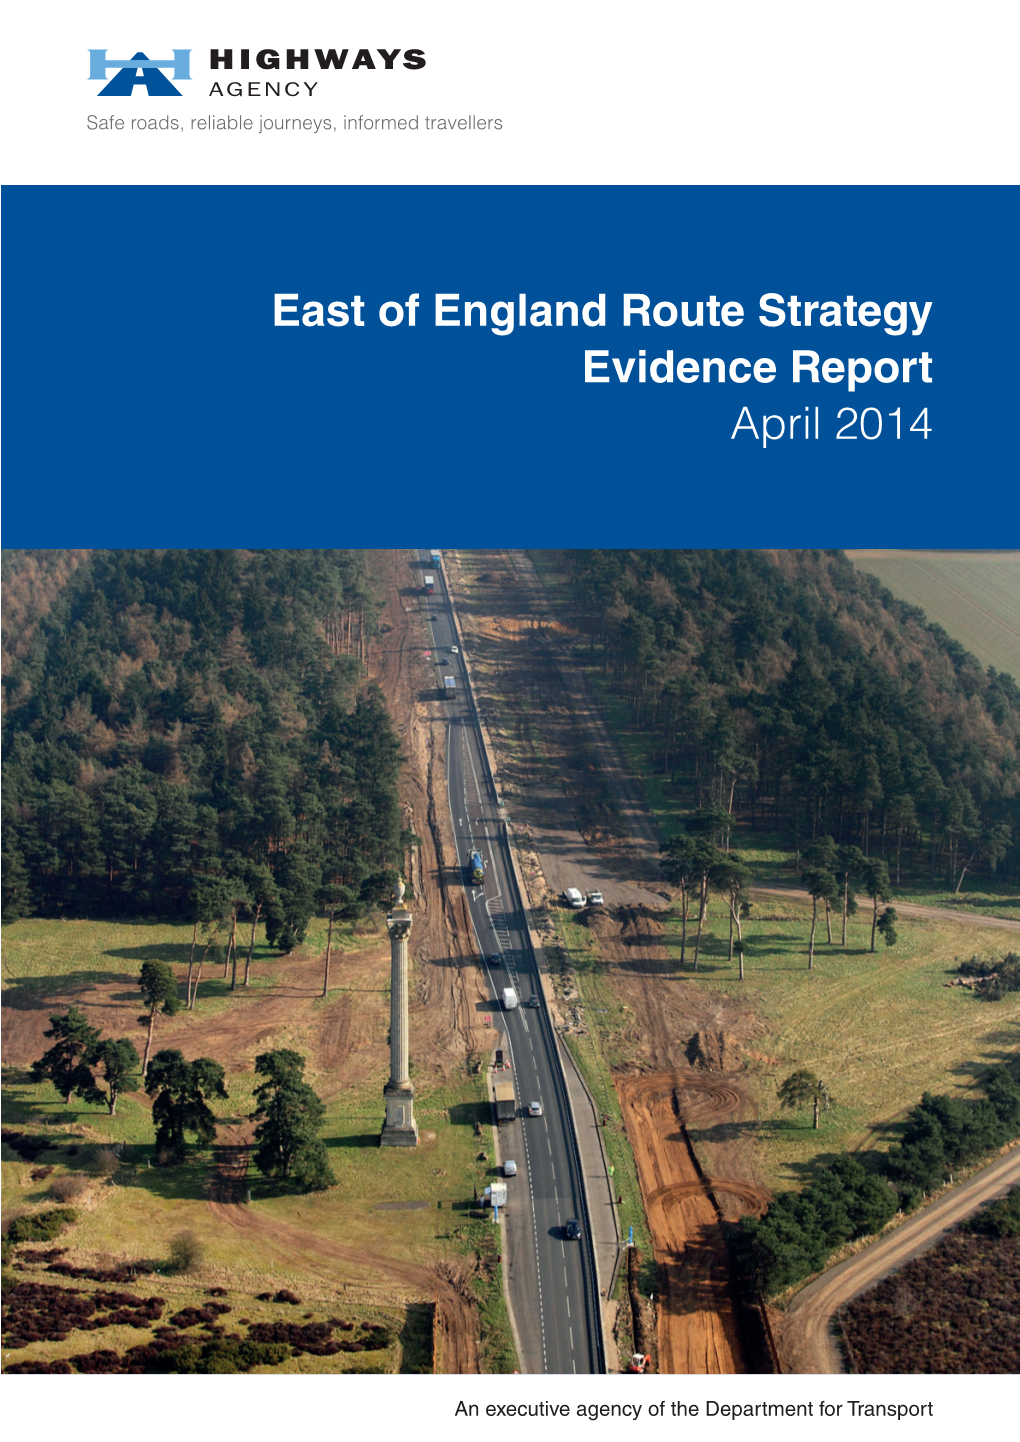 East of England Route Strategy Evidence Report April 2014